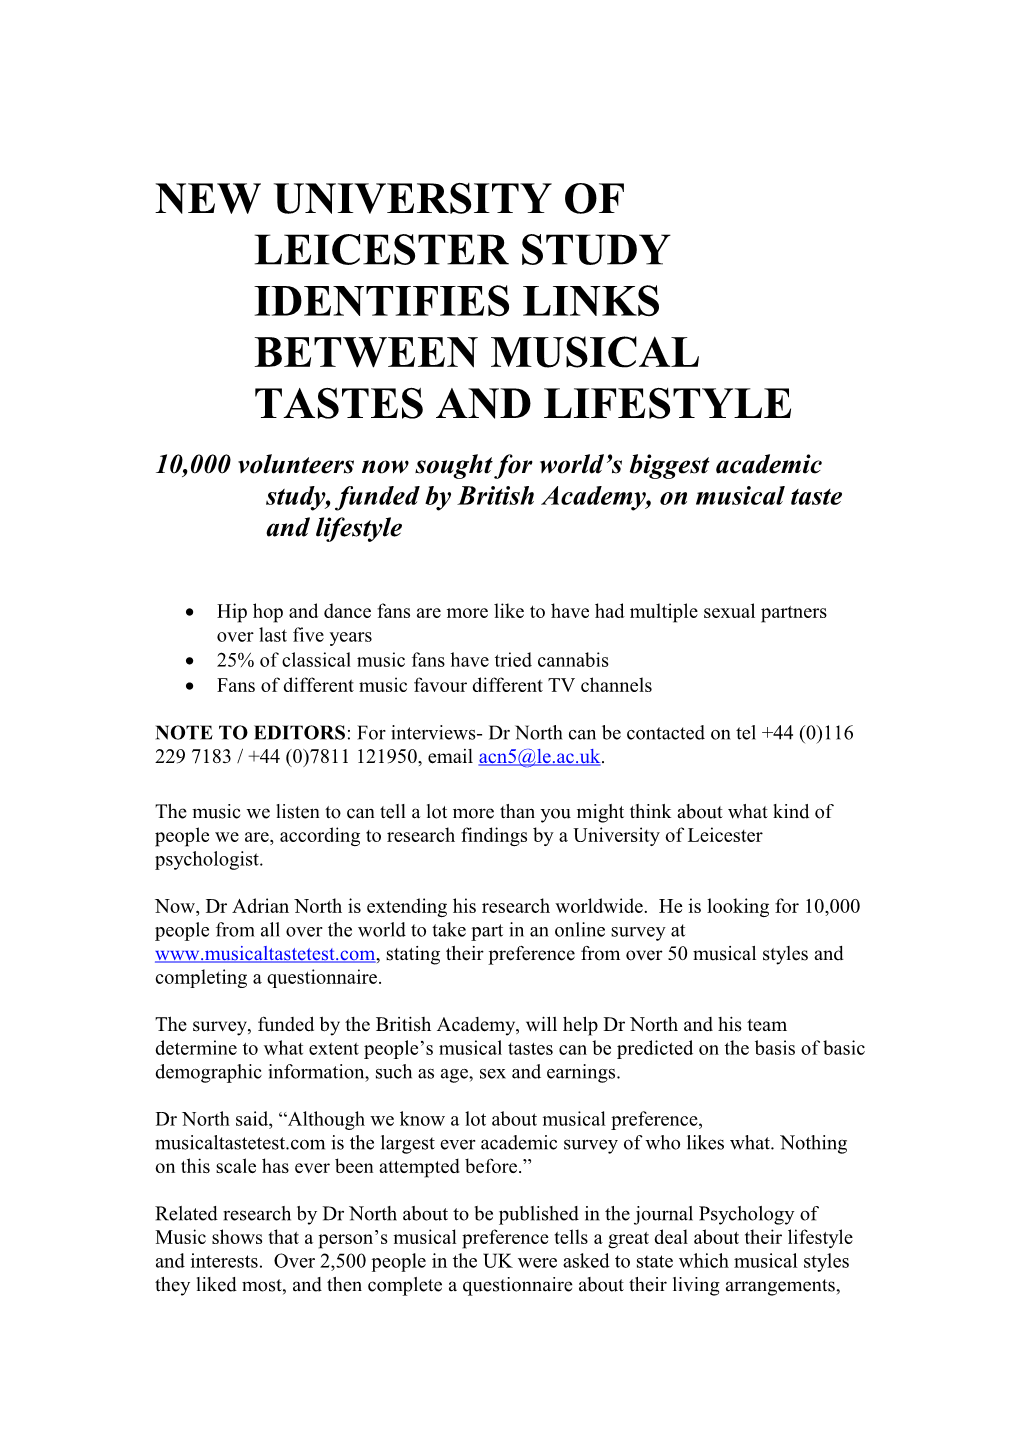 New University of Leicester Study Identifies Links Between Musical Tastes and Lifestyle